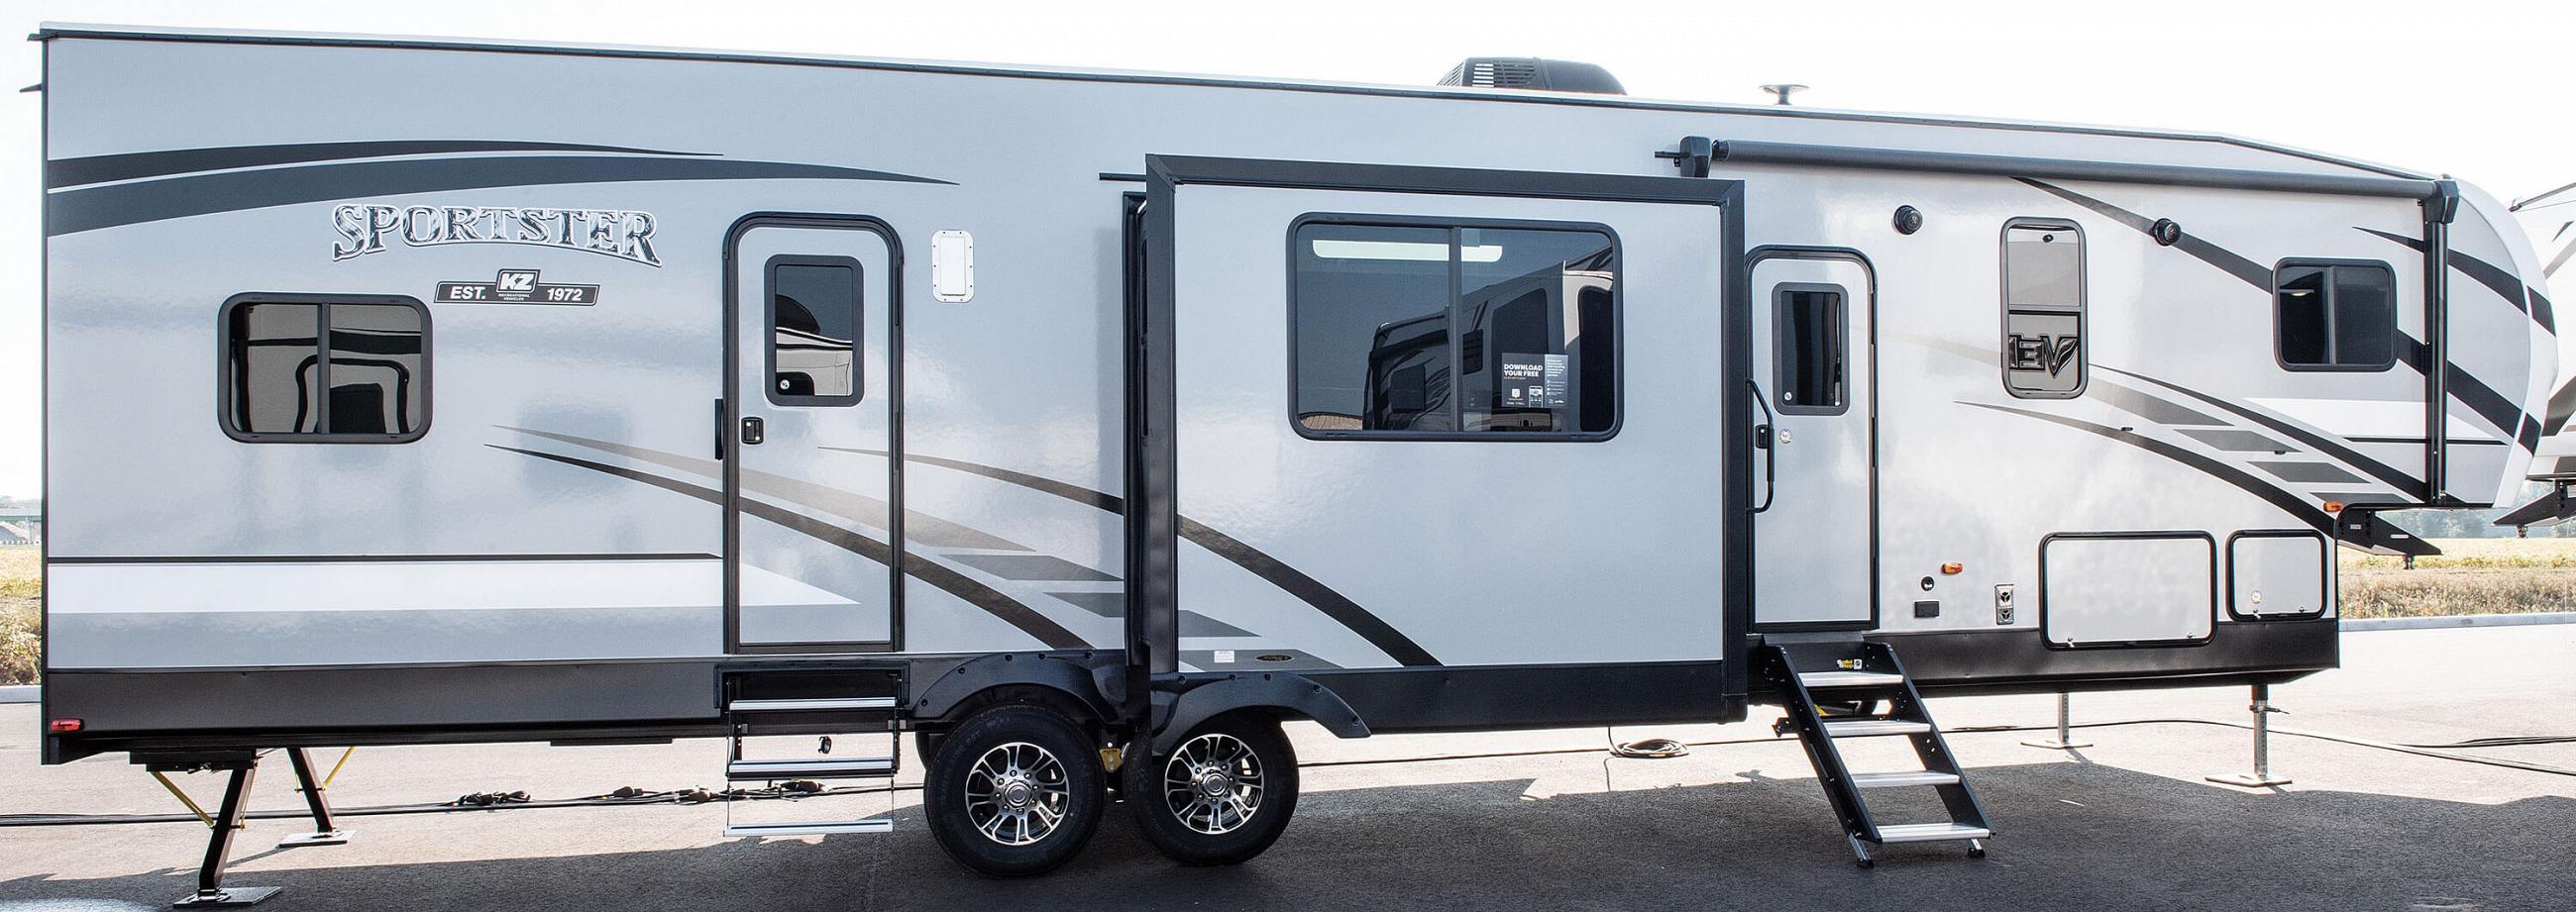 Sportster 353TH13 Fifth Wheel Toy Hauler | KZ RV 5th Wheel With Door On Driver Side